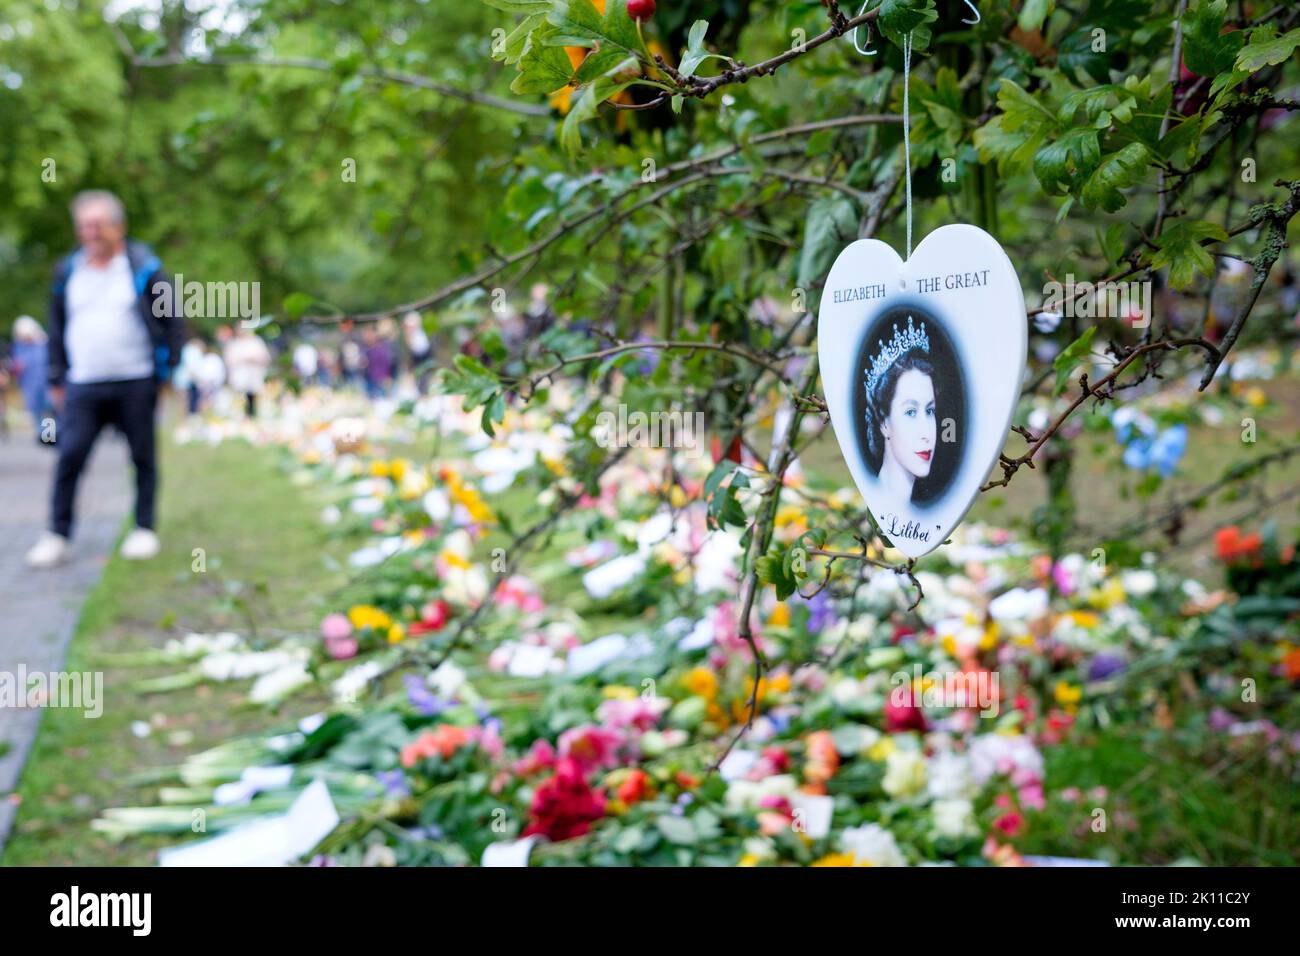 London, UK. 14th Sep, 2022. As crowds of people came to London to watch Her Majesty the Queen's coffin being transported to the Palace of Westminster, people are pictured as they view the flowers cards, bears and other tributes that have been left in Green Park, London. Credit: Lynchpics/Alamy Live News Stock Photo